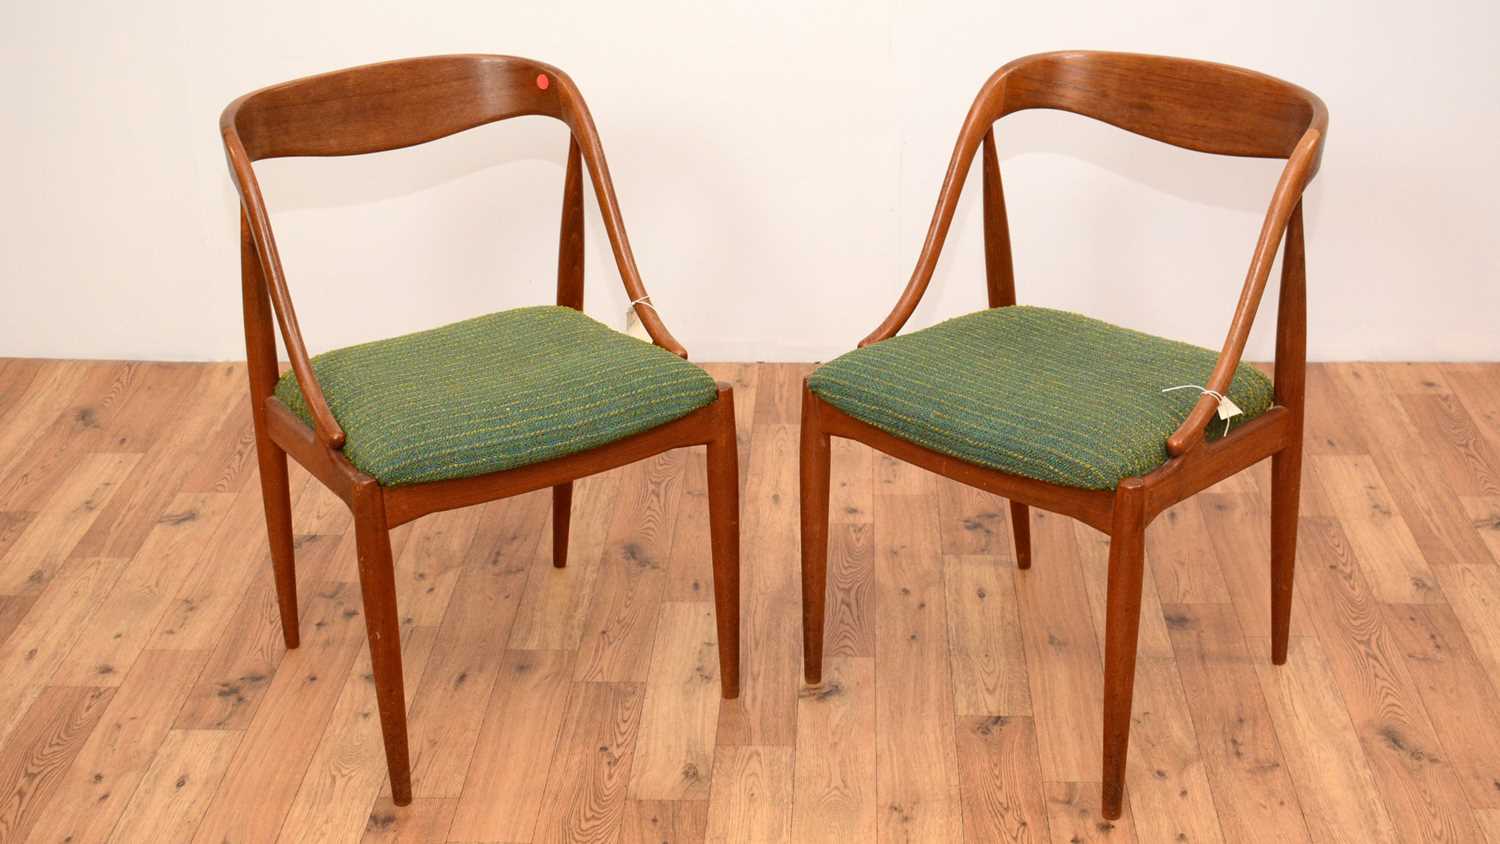 Lot 102 - Attributed to Johannes Andersen - A pair of retro vintage  circa 1960s teak dining chairs